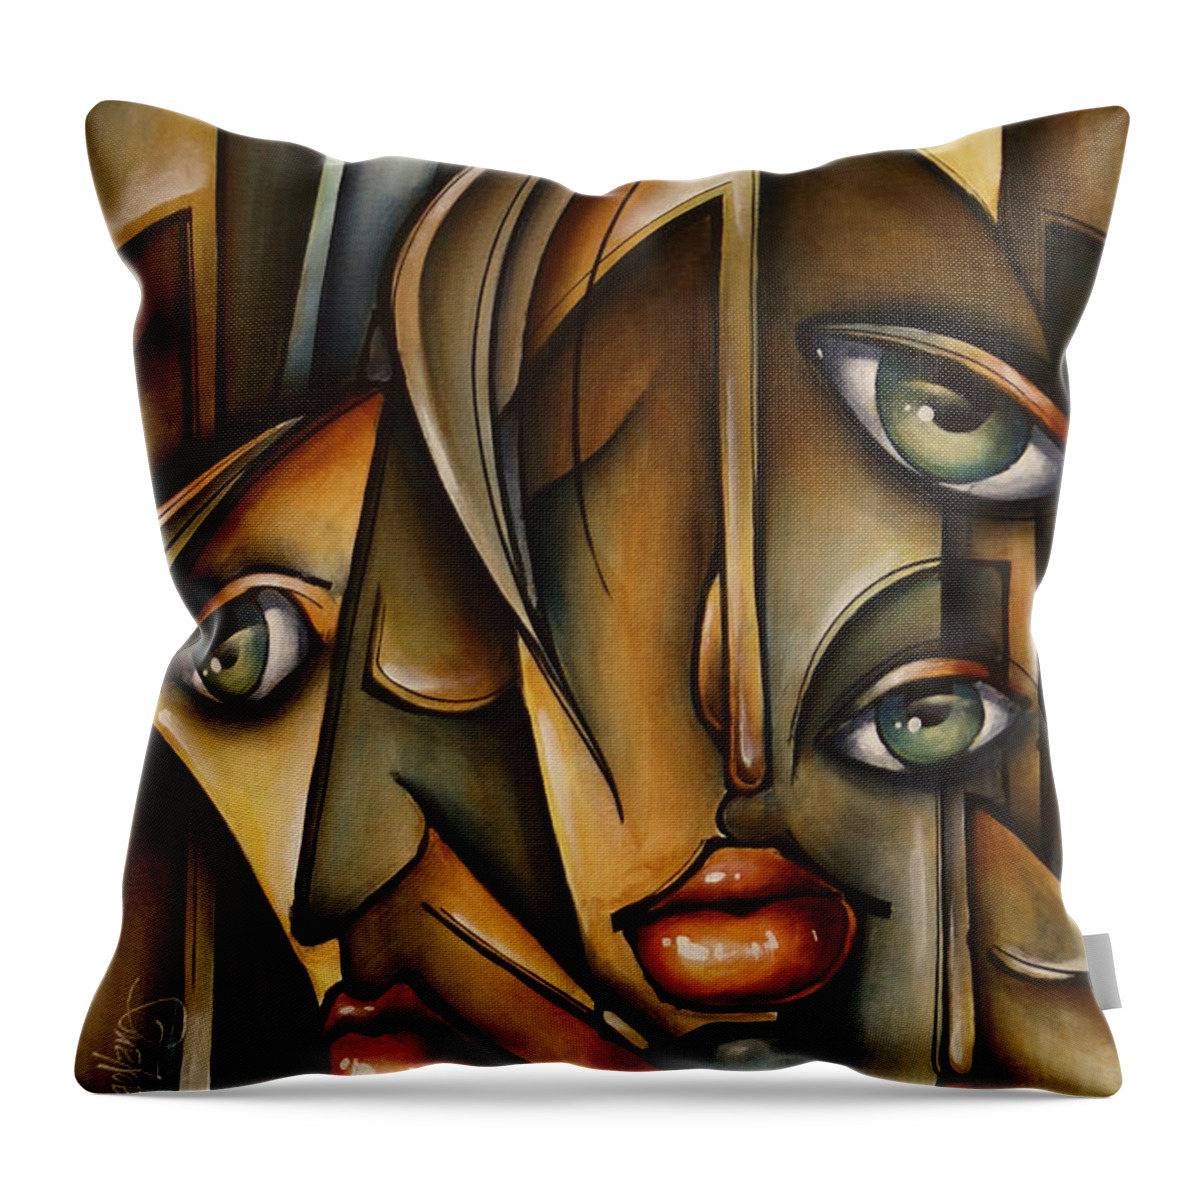 Figurative Throw Pillow featuring the painting Urban expression by Michael Lang